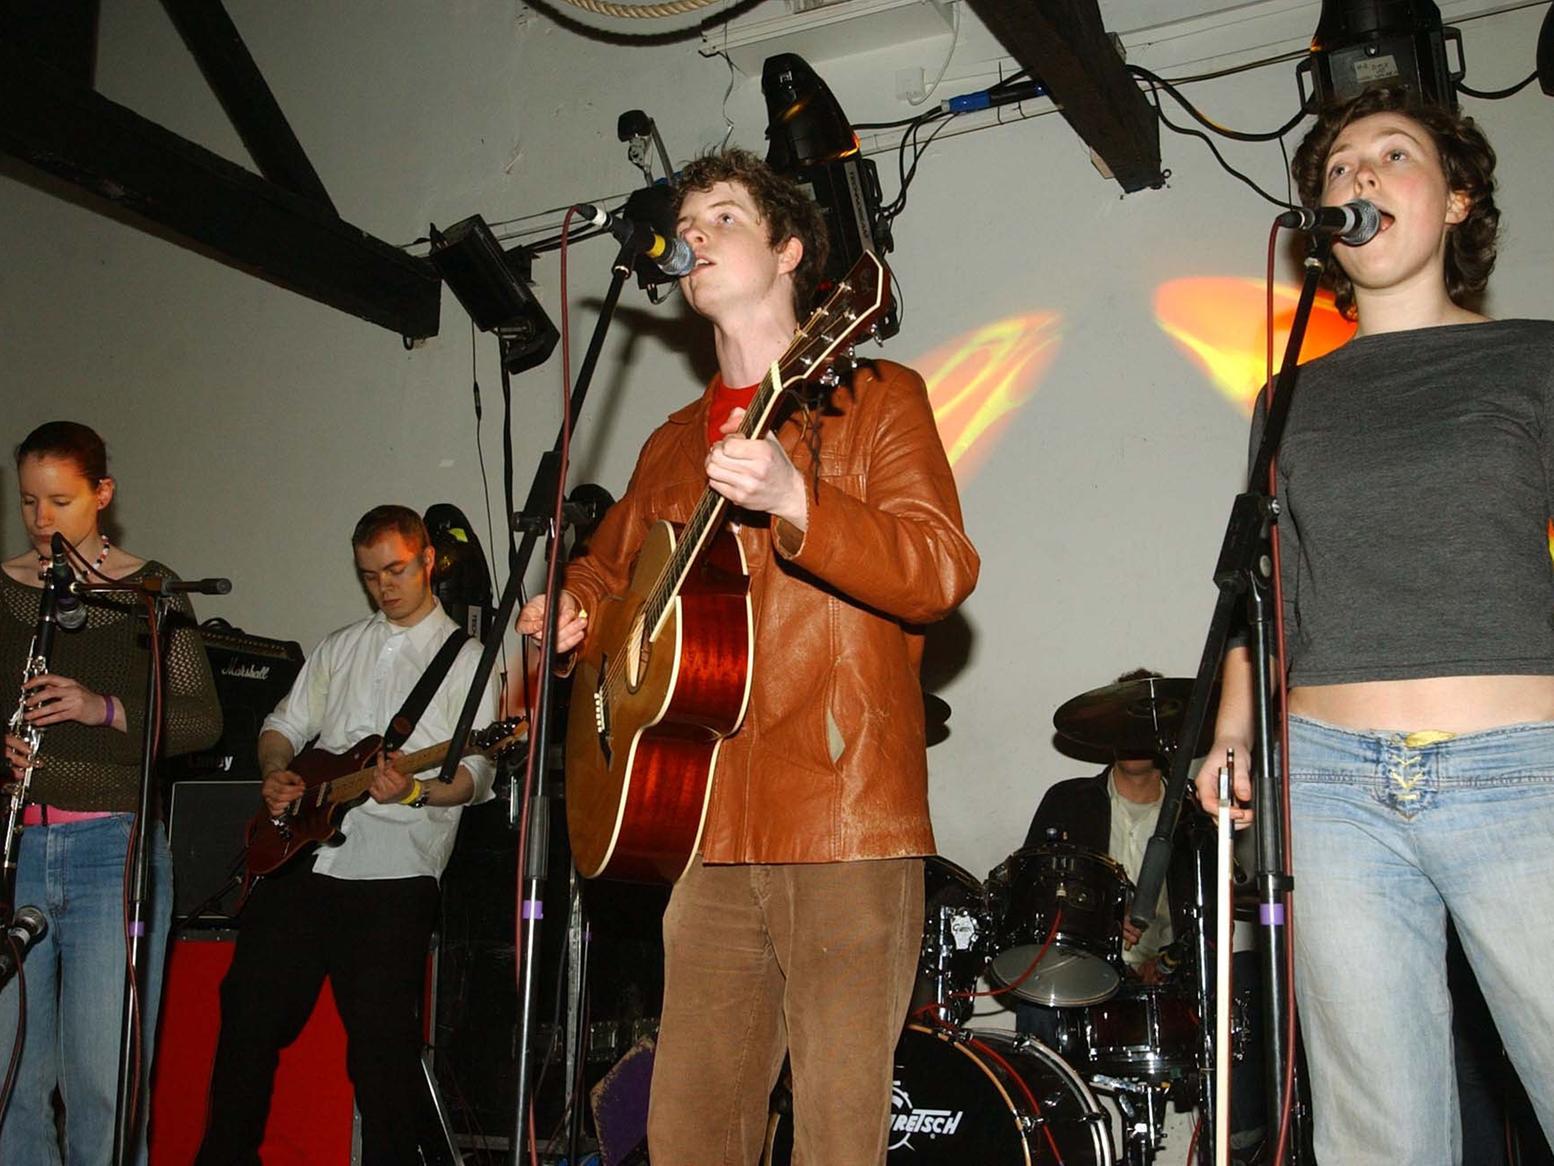 Lead singer Steve Deegan belts out a tune as part of the Bright Young Things showcase at The Wardrobe  in 2004.